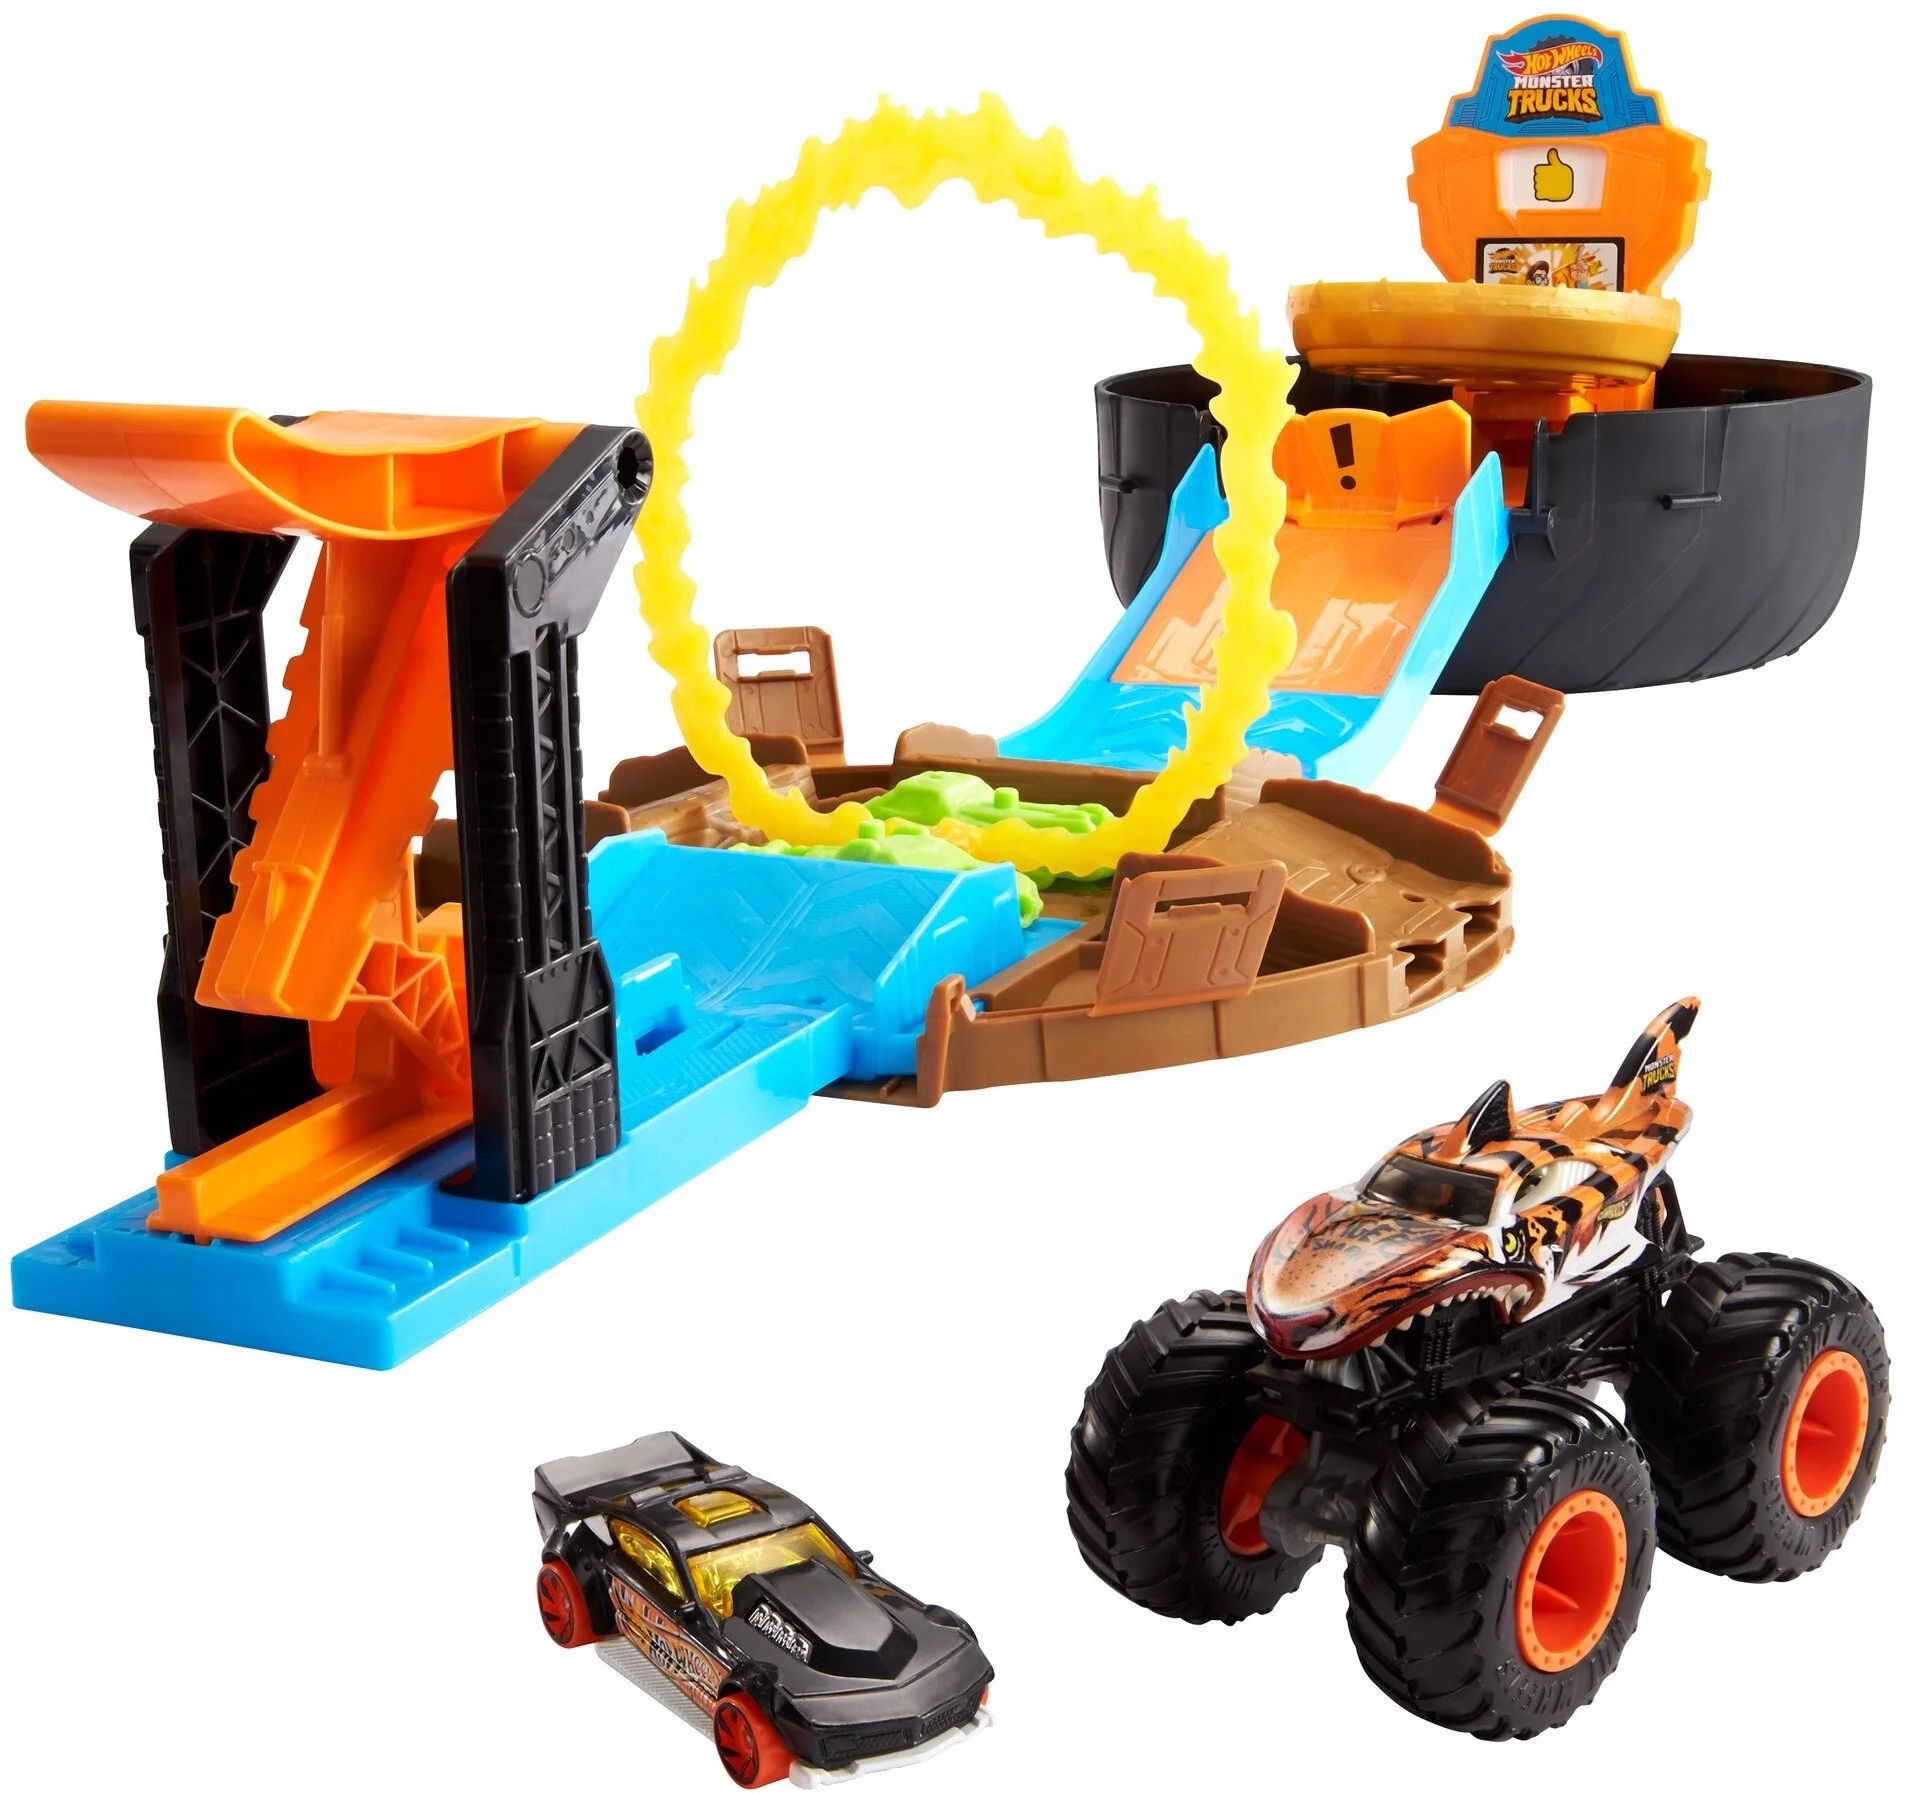 Hot Wheels Monster Trucks Stunt Tire Play Set Opens To Reveal Arena With Launcher For 2 Hot Wheel... | Walmart (US)